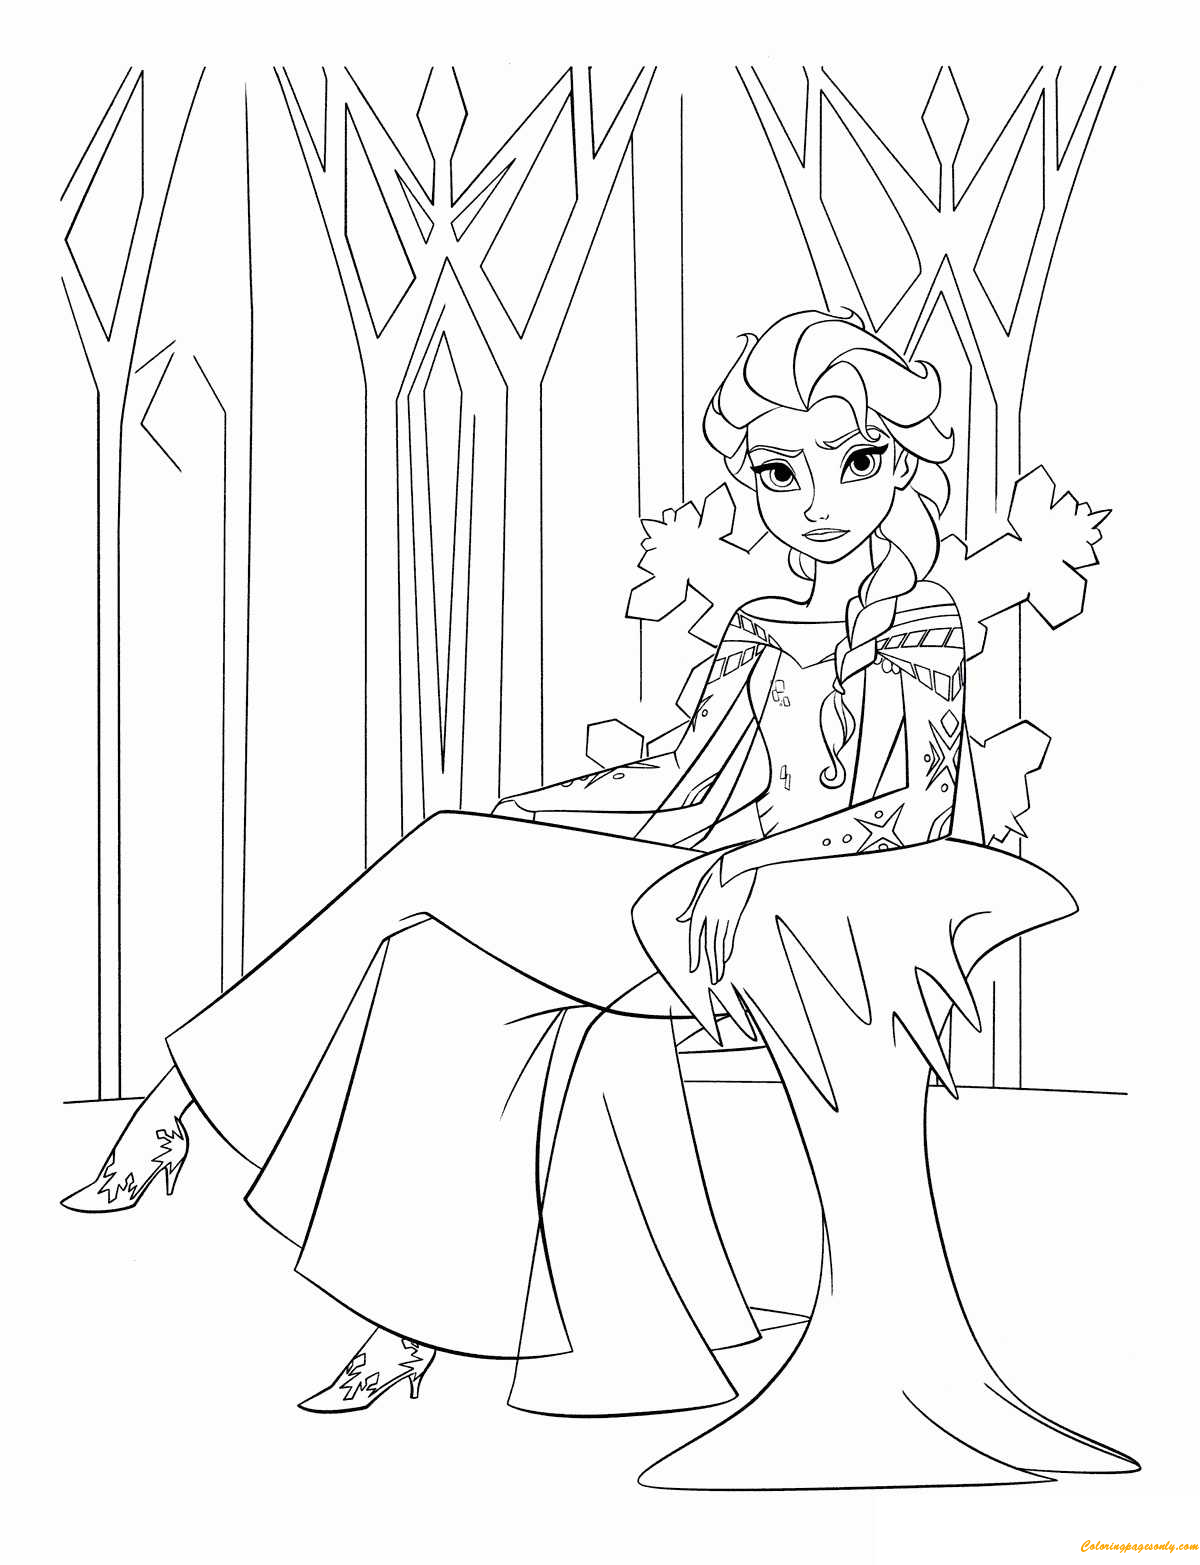 Queen Elsa Of Arendelle Coloring Pages